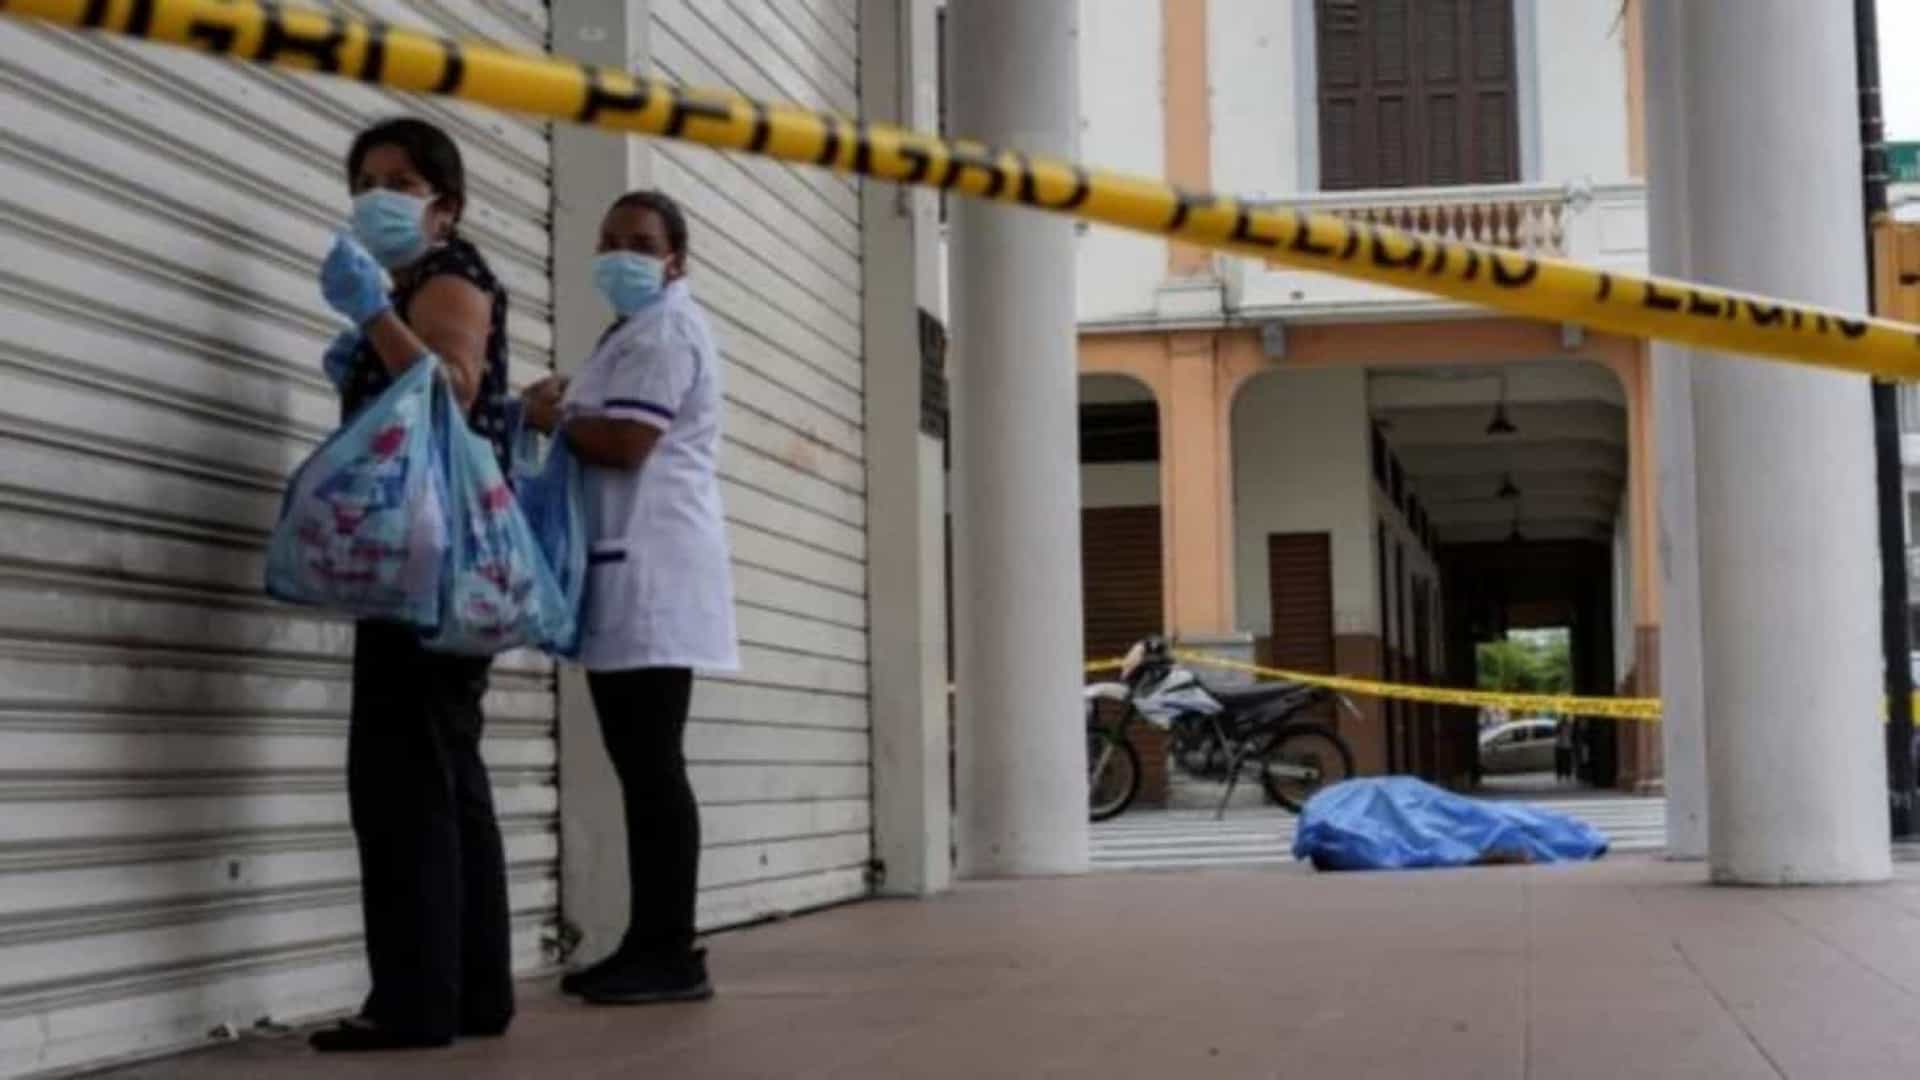 In the city of Guayaquil, many people began to report that they were forced to place the bodies of victims on the streets, since the government is unable to pick up the corpses from their relatives' homes.